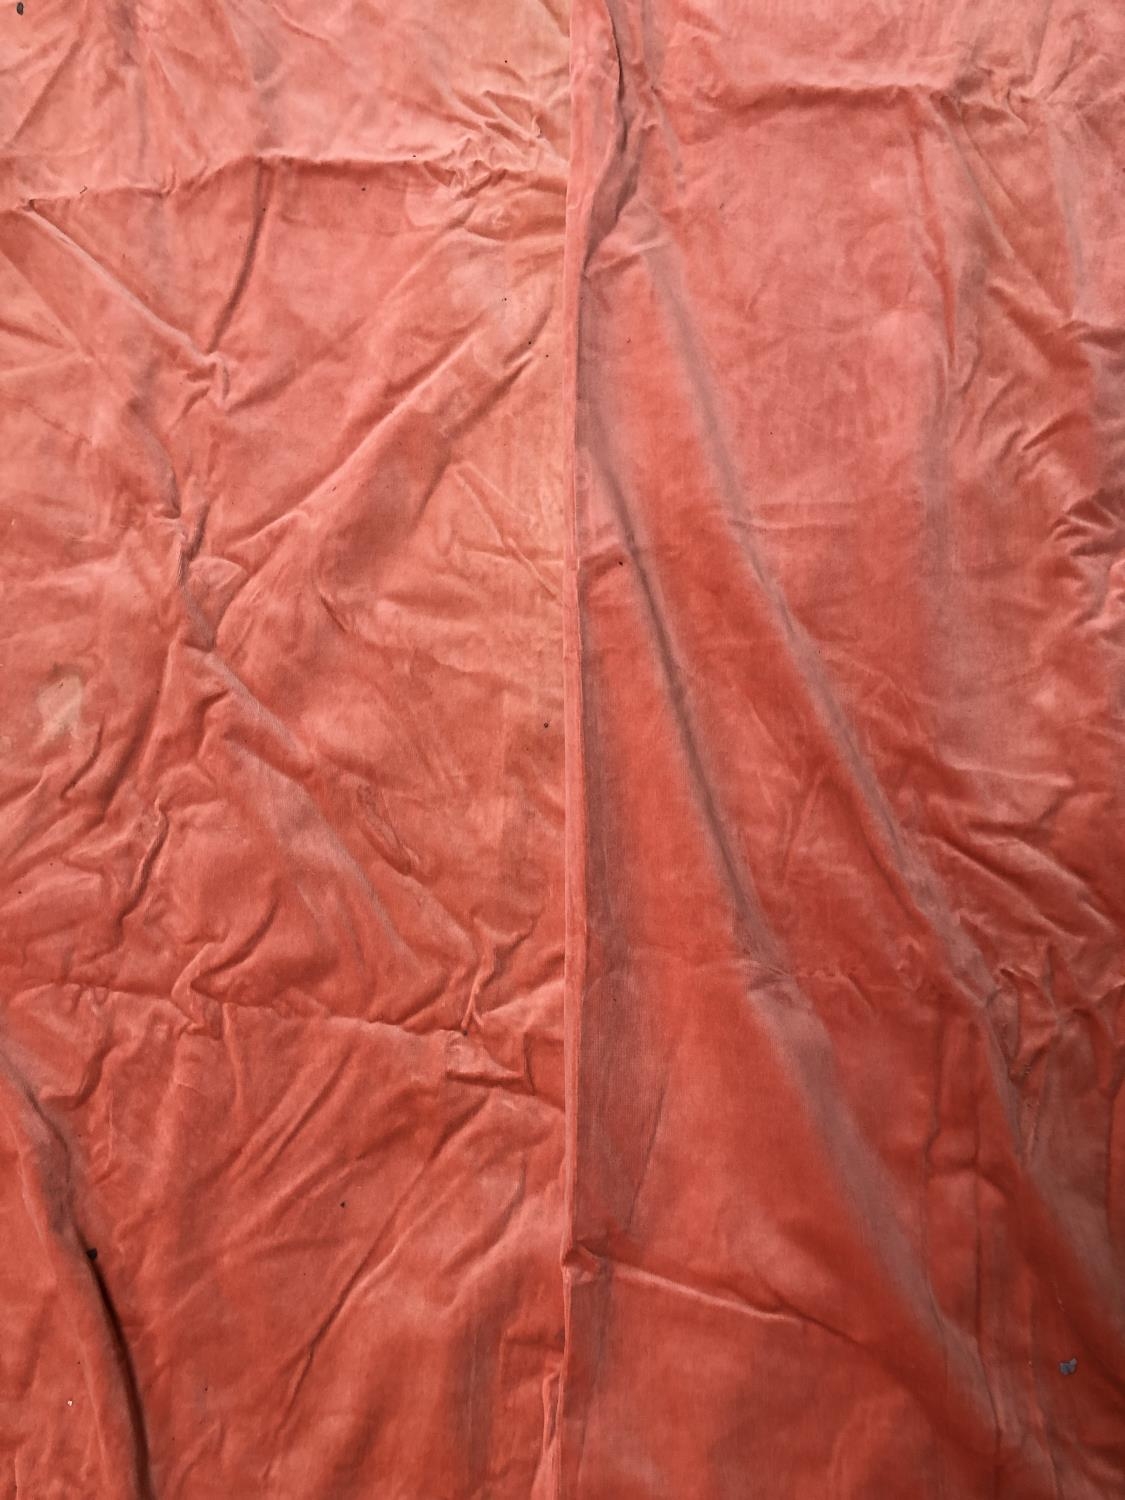 Five coral velvet curtains, lined; each approx 225cm drop, 110cm ungathered width; some fading, with